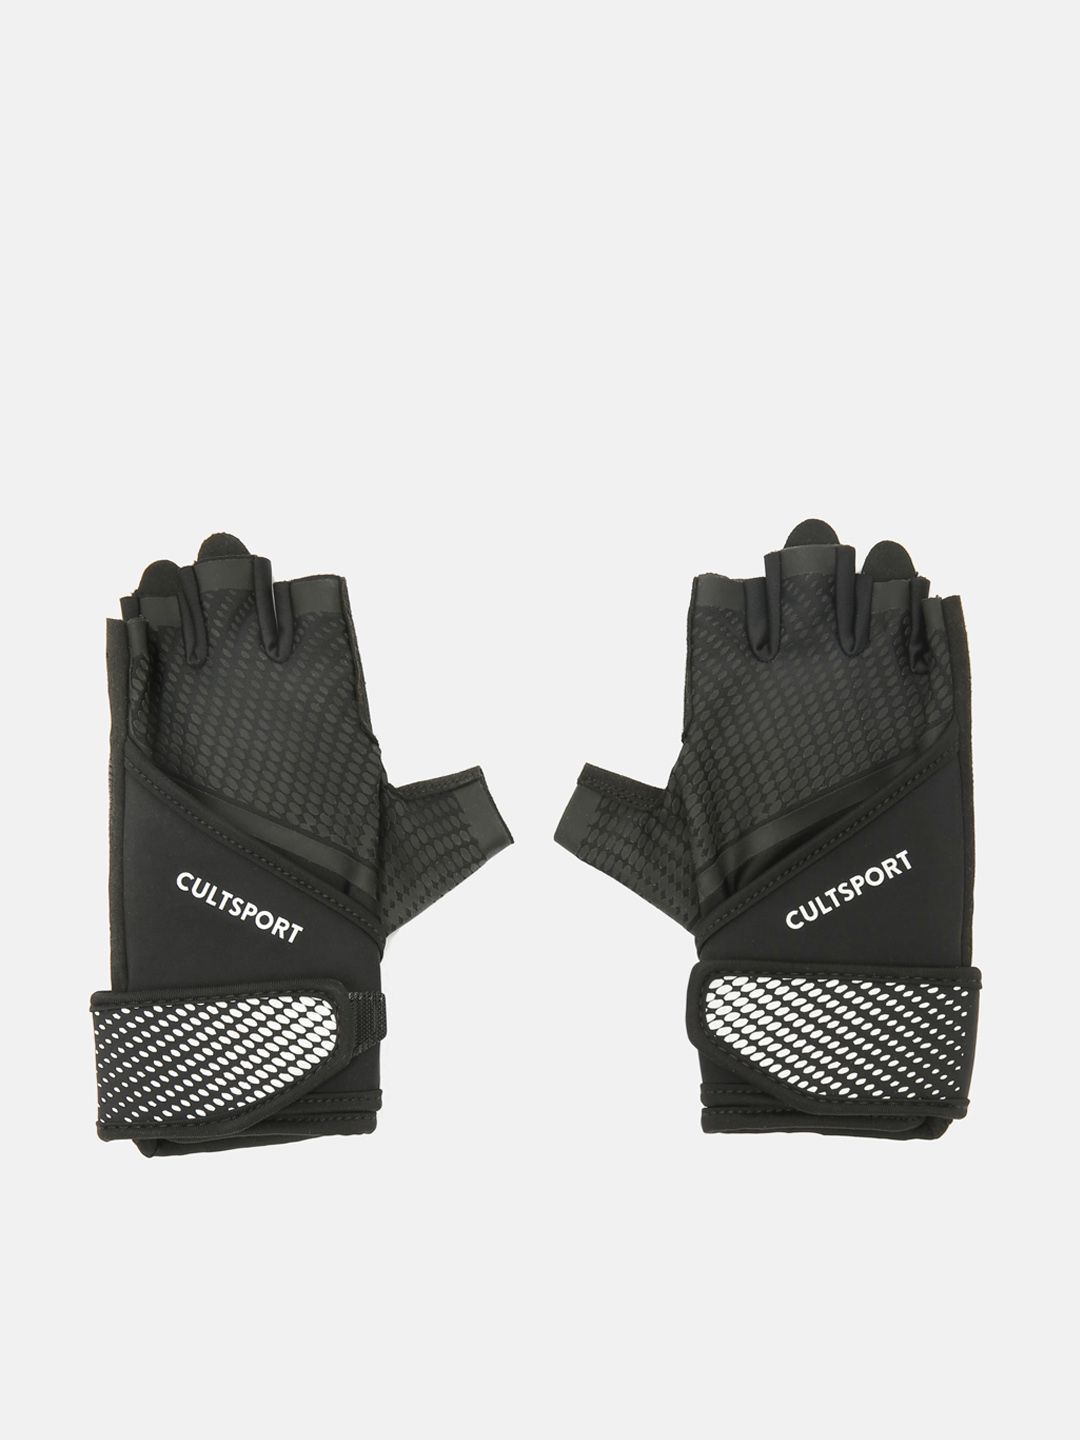 Cultsport Black & White Printed Training Workout Gloves Price in India